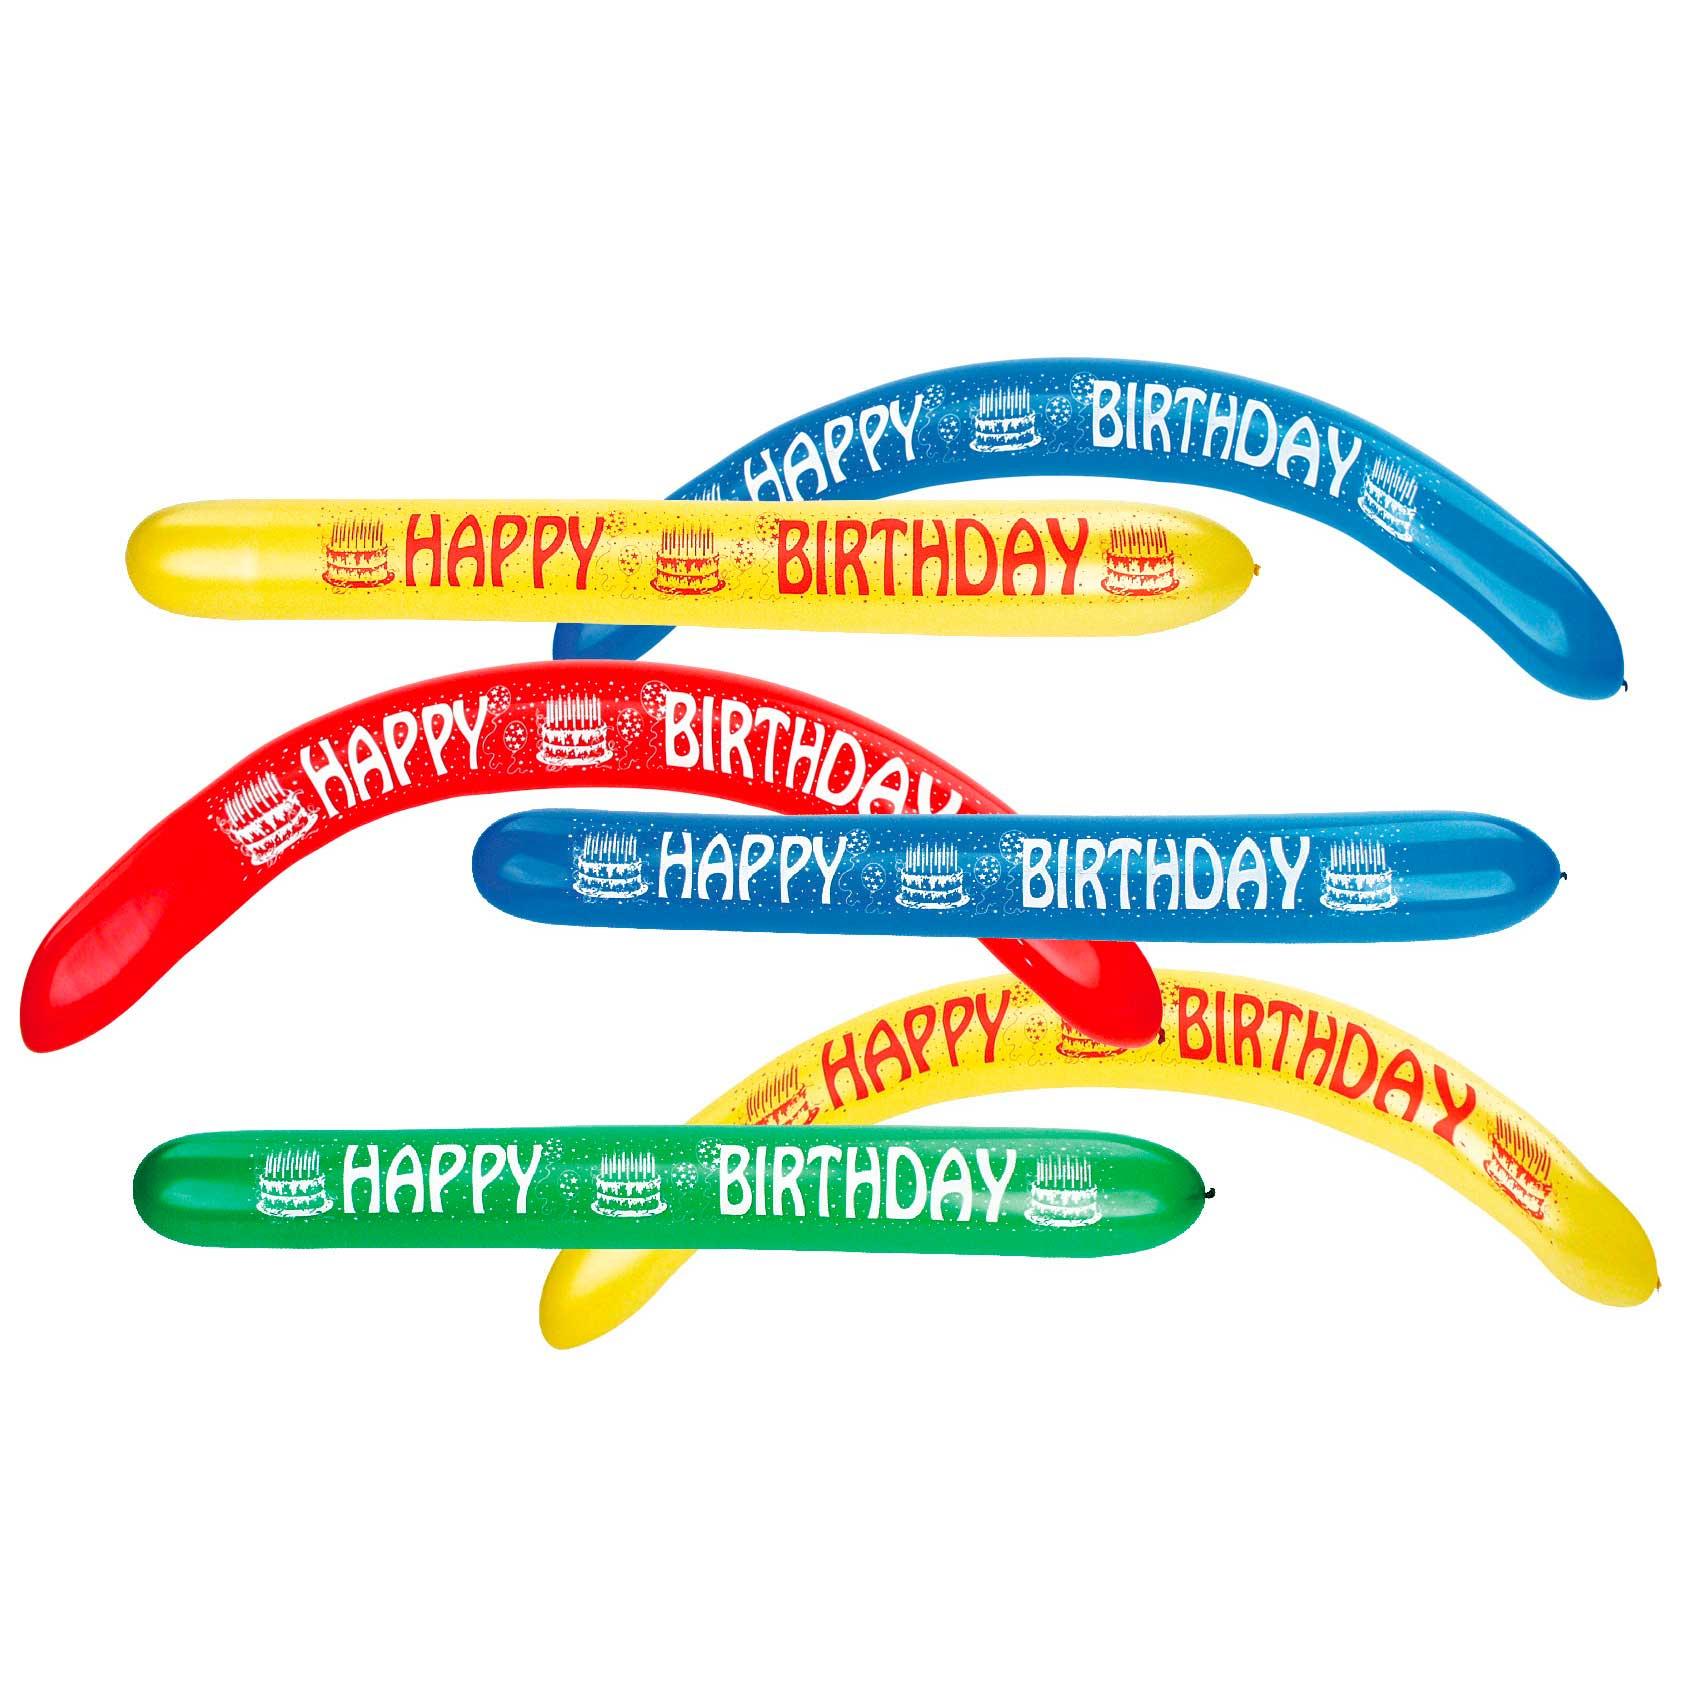 Happy Birthday Balloon Banners 2pcs Balloons & Streamers - Party Centre